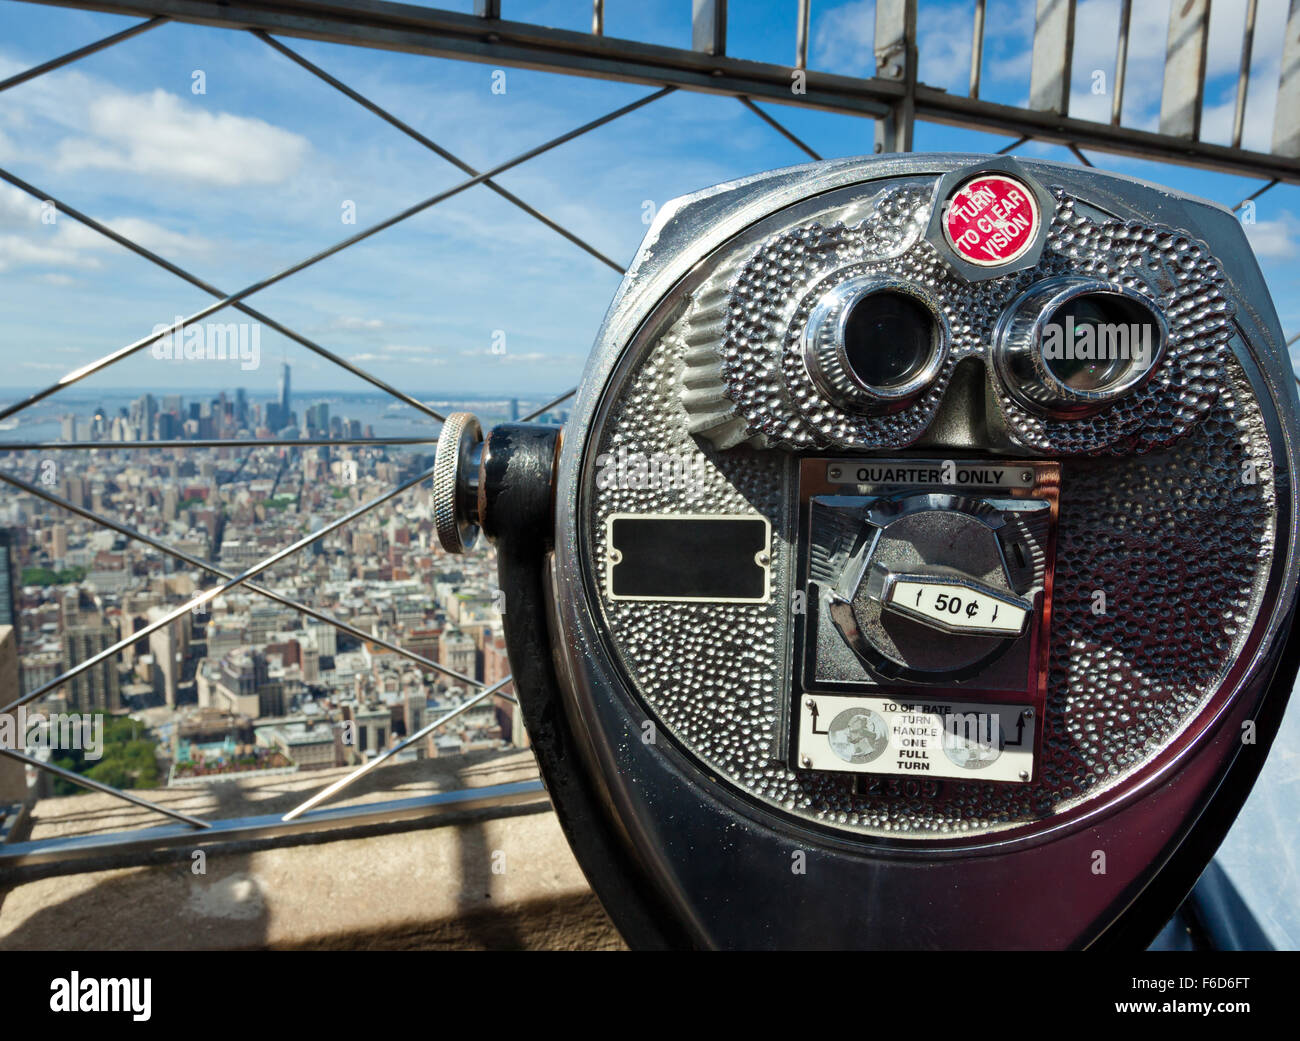 Coin operated binoculars, top of the empire state building, New York. Stock Photo